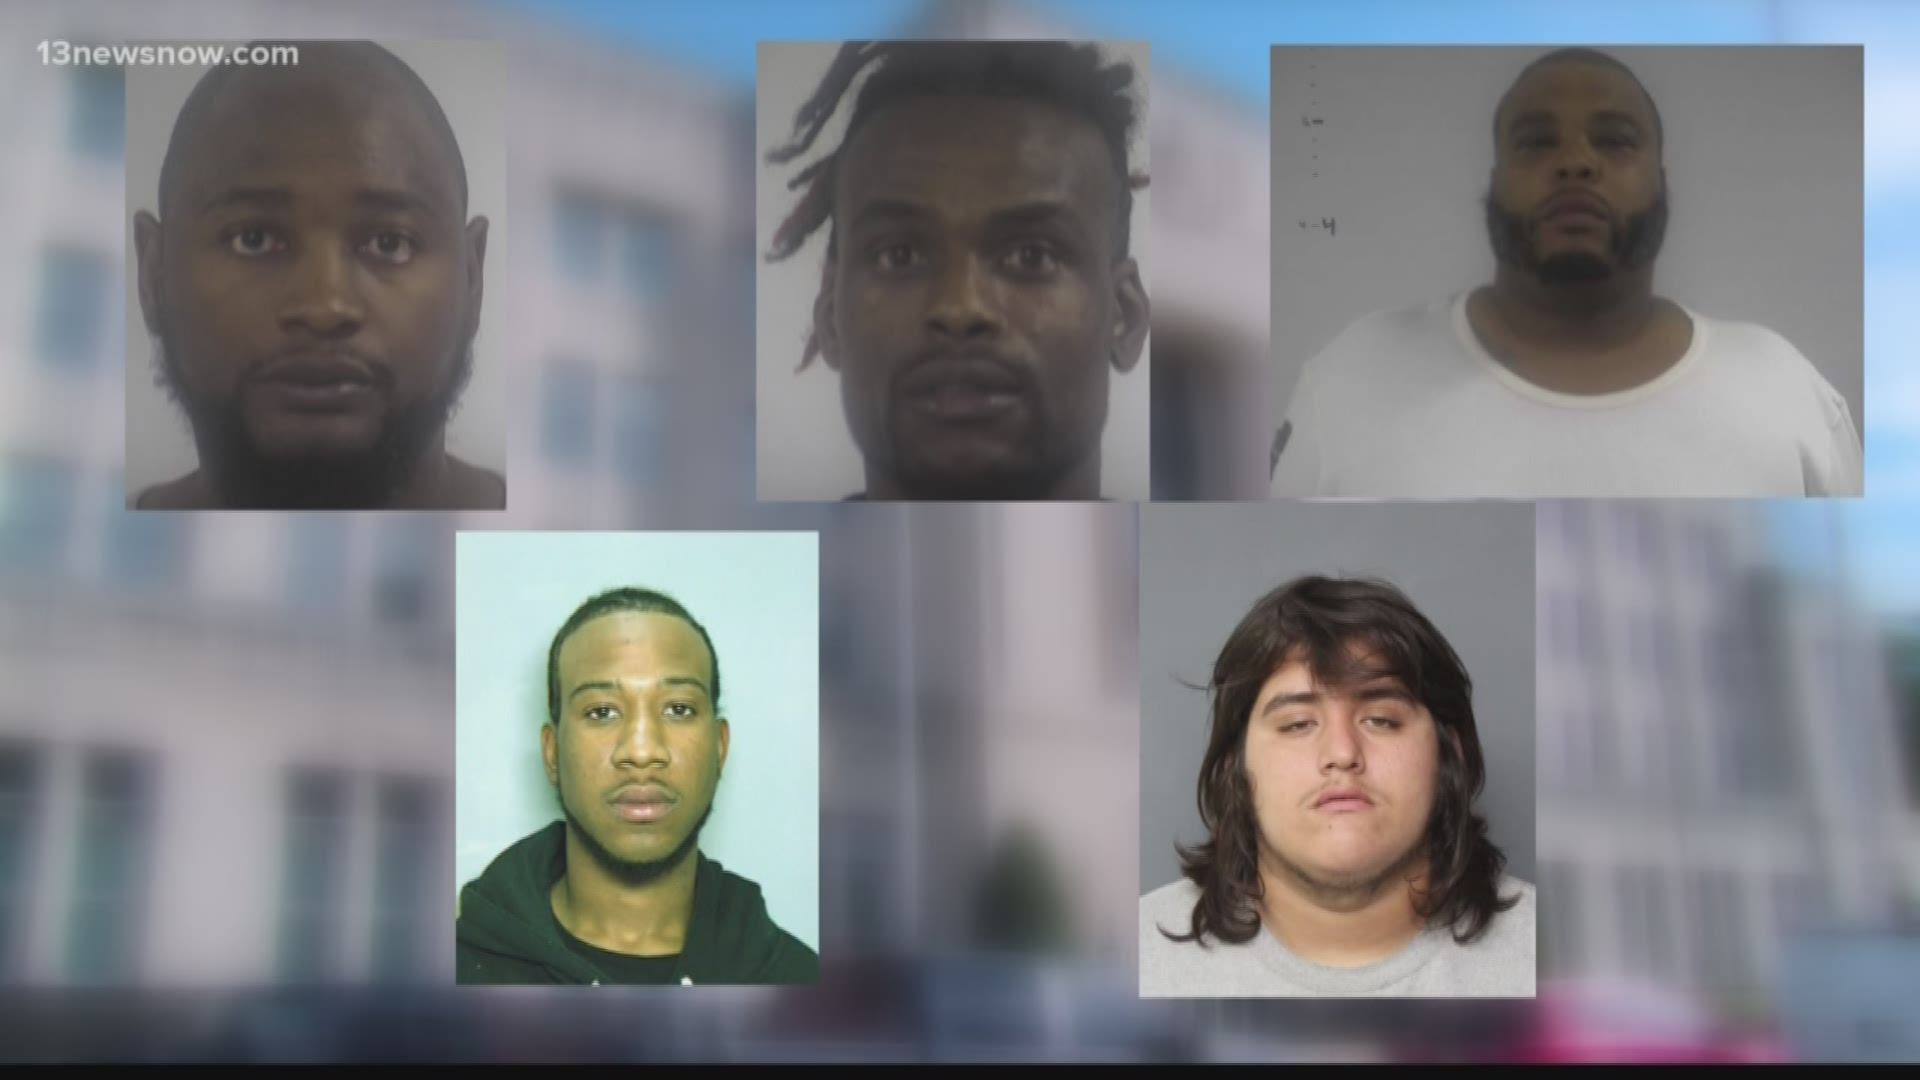 Five men accused of pushing $19 million worth of drugs appeared in federal court Friday.